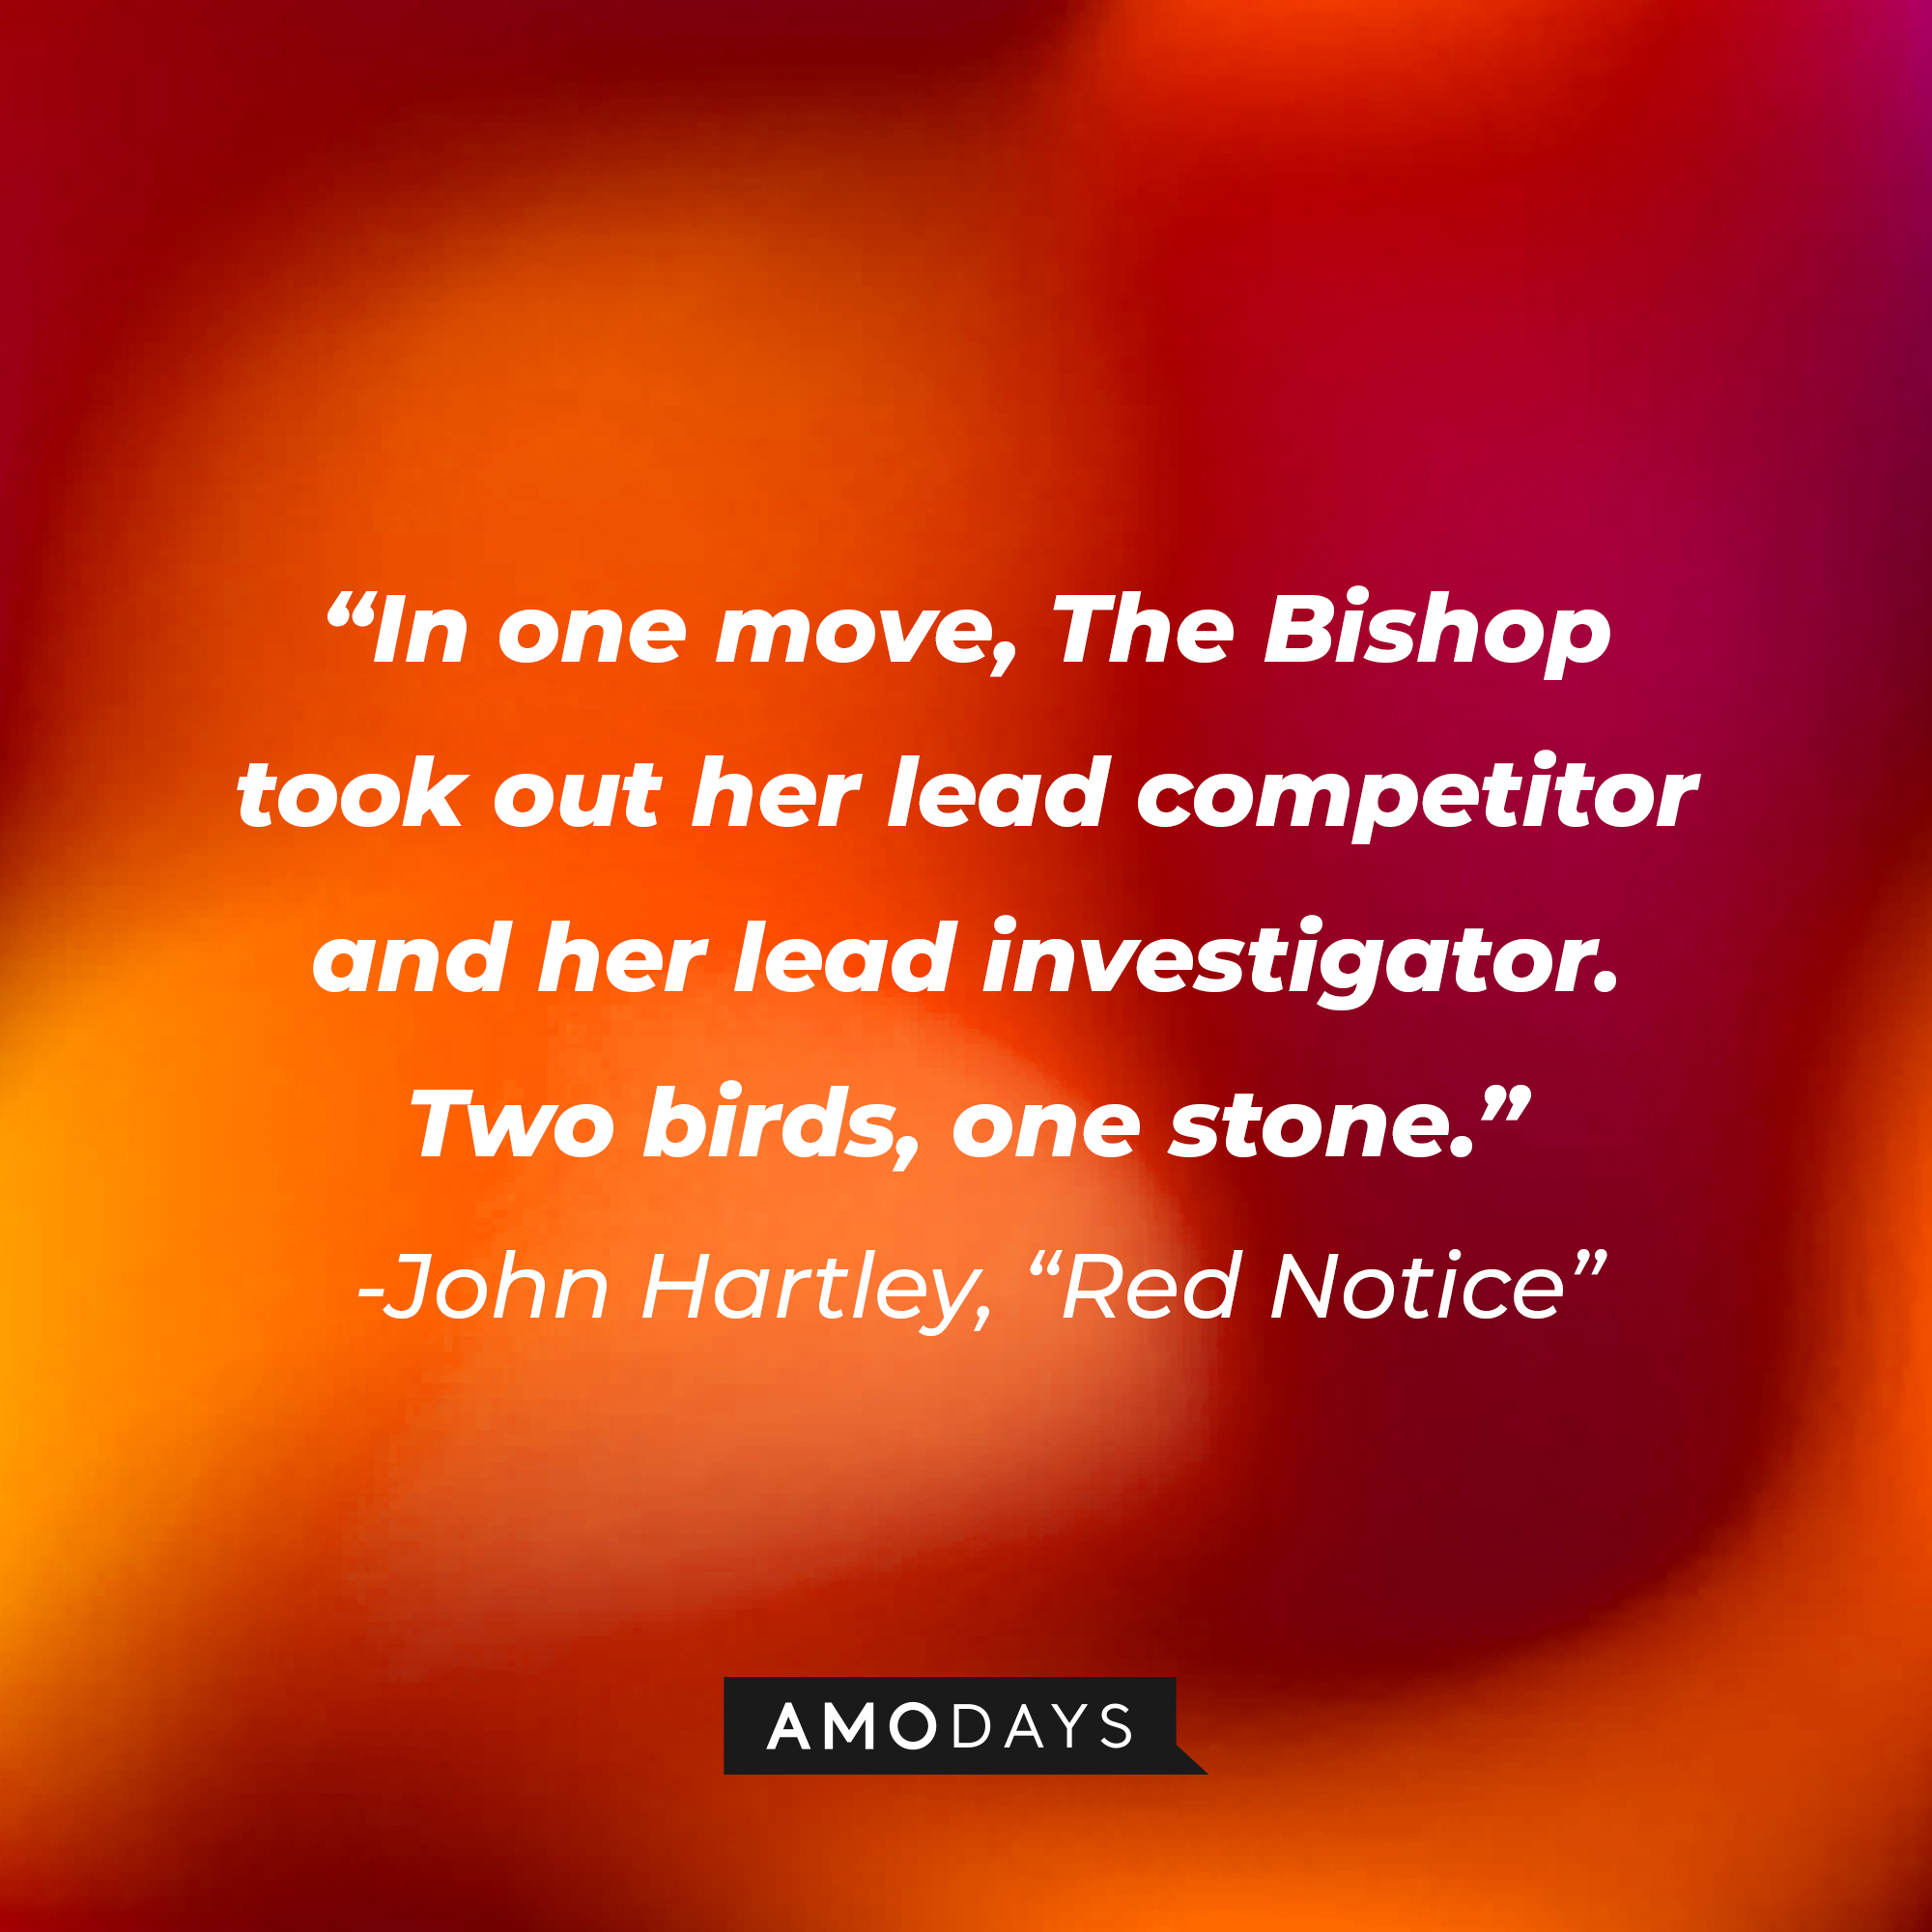 John Hartley's quote from "Red Notice:" “In one move, The Bishop took out her lead competitor and her lead investigator. Two birds, one stone.” | Source: AmoDays